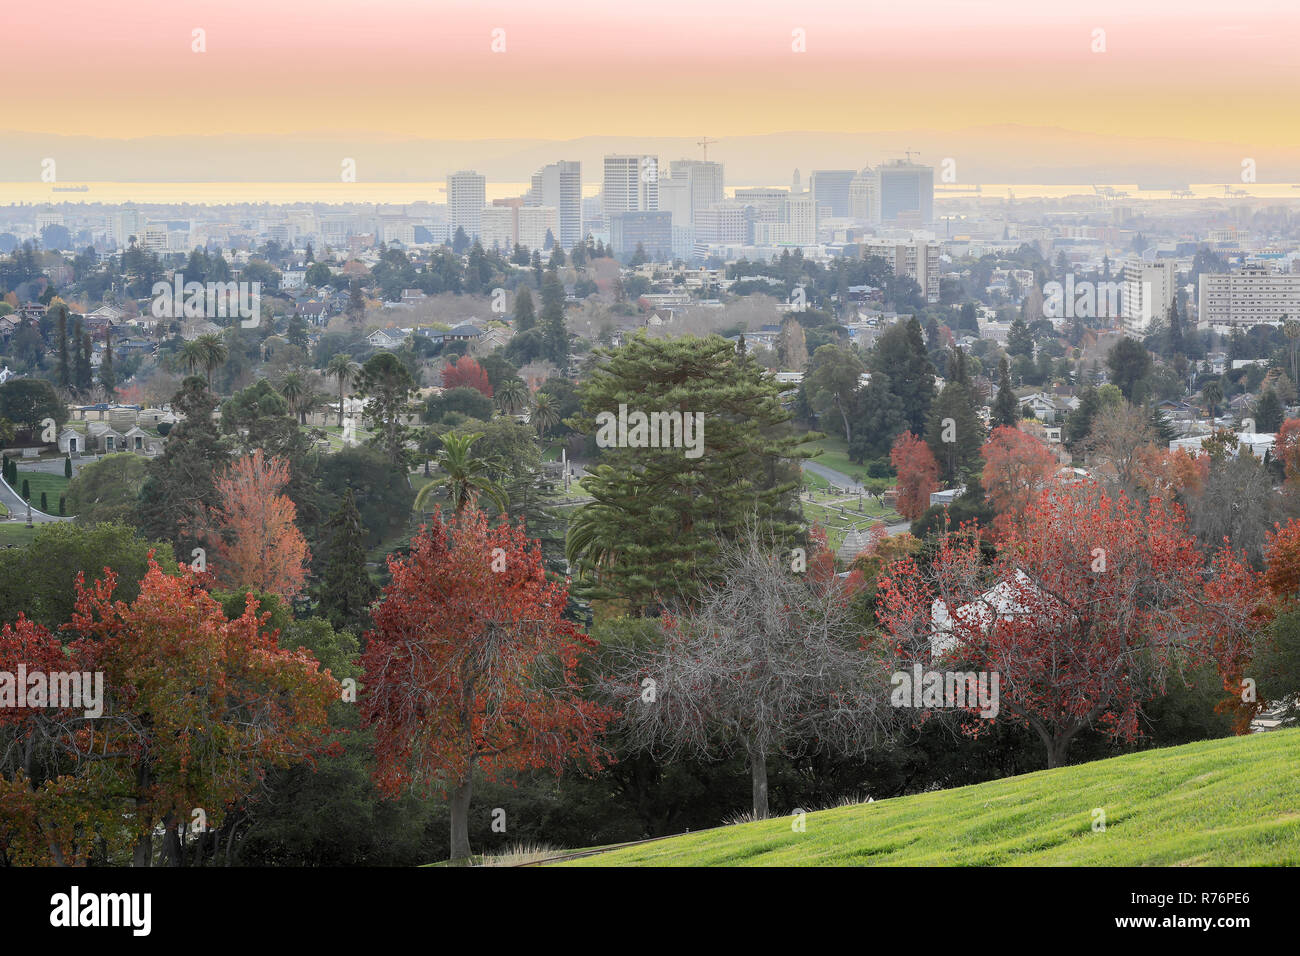 Sunset views of Oakland Downtown and San Francisco Bay from a hilltop in Mountain View Cemetery. Stock Photo